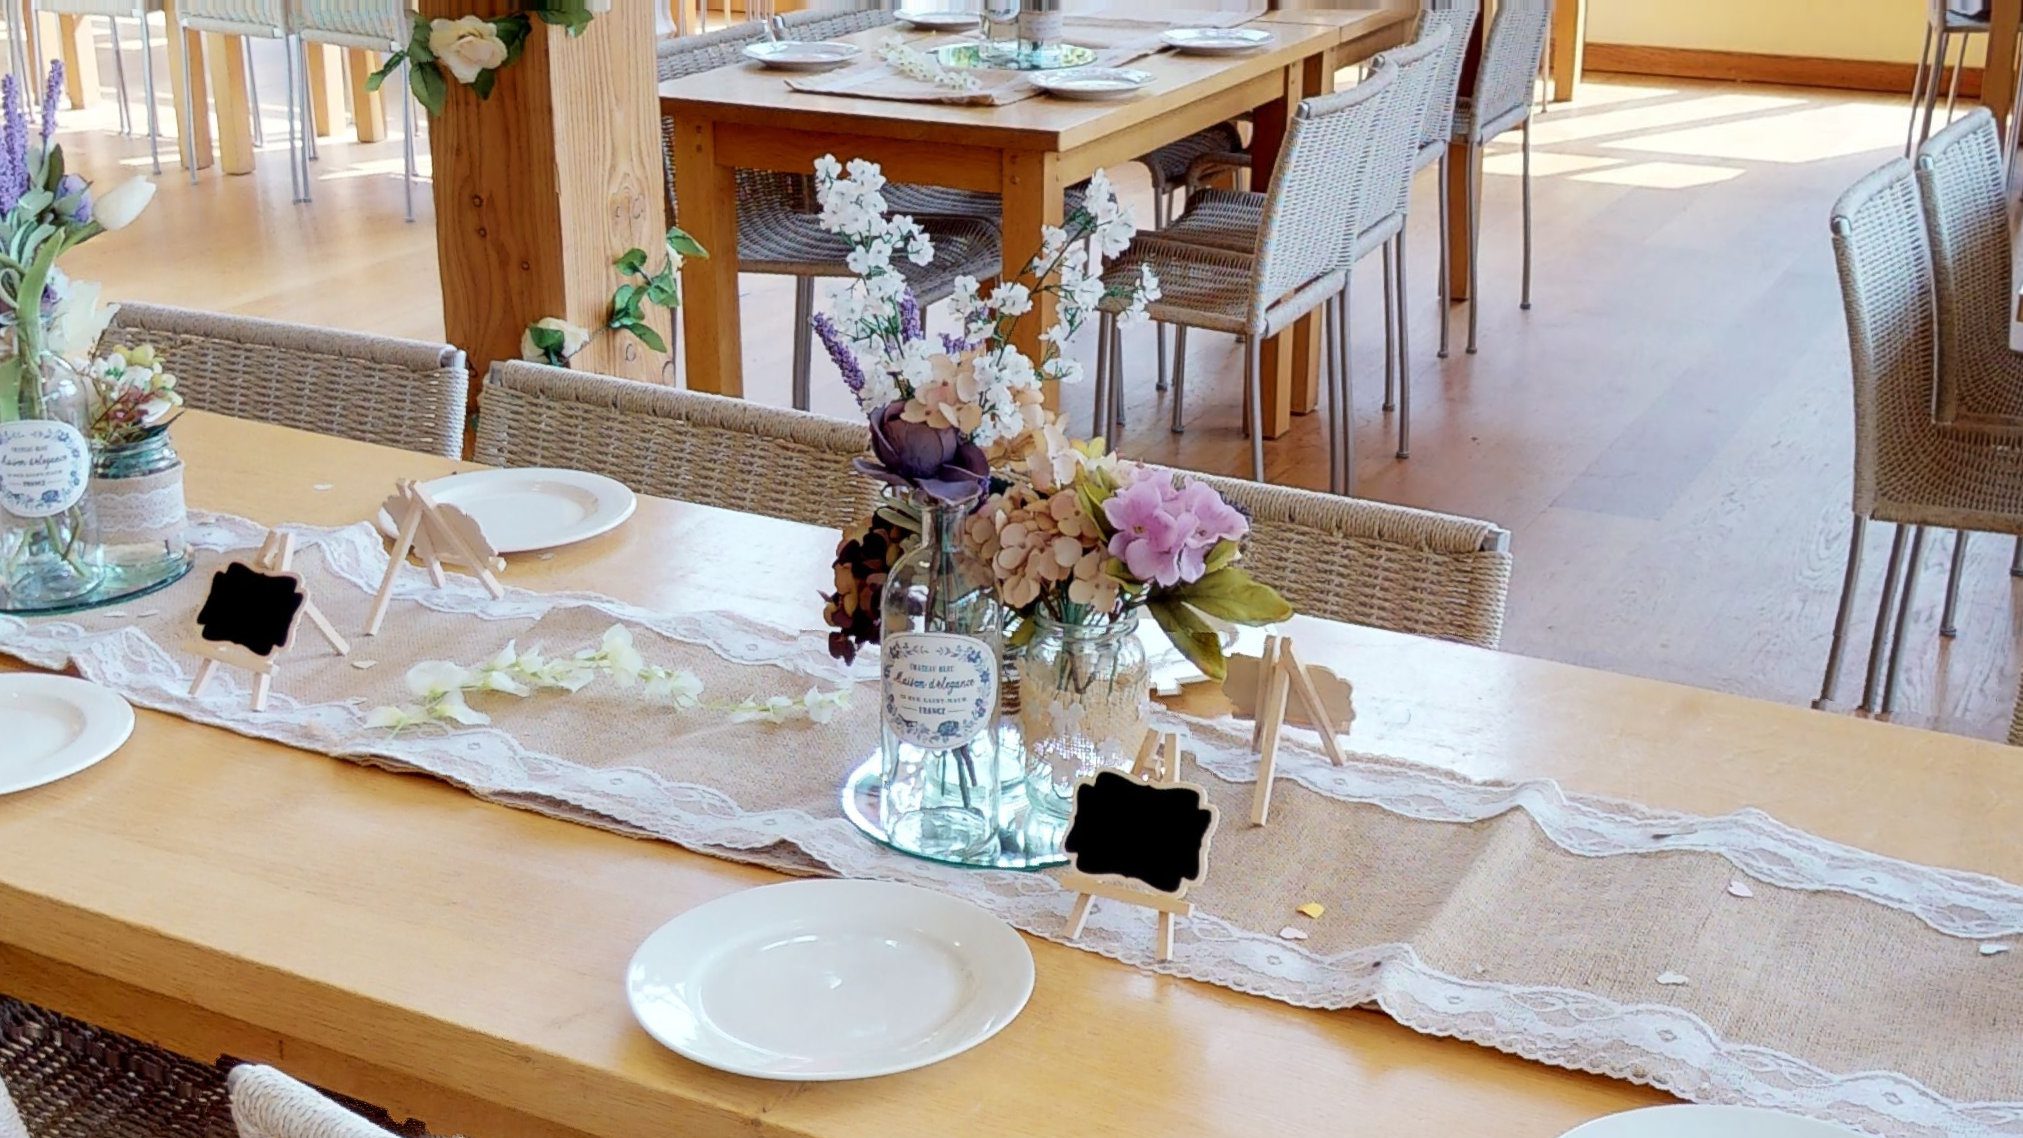 A closeup of a table dressed for a wedding